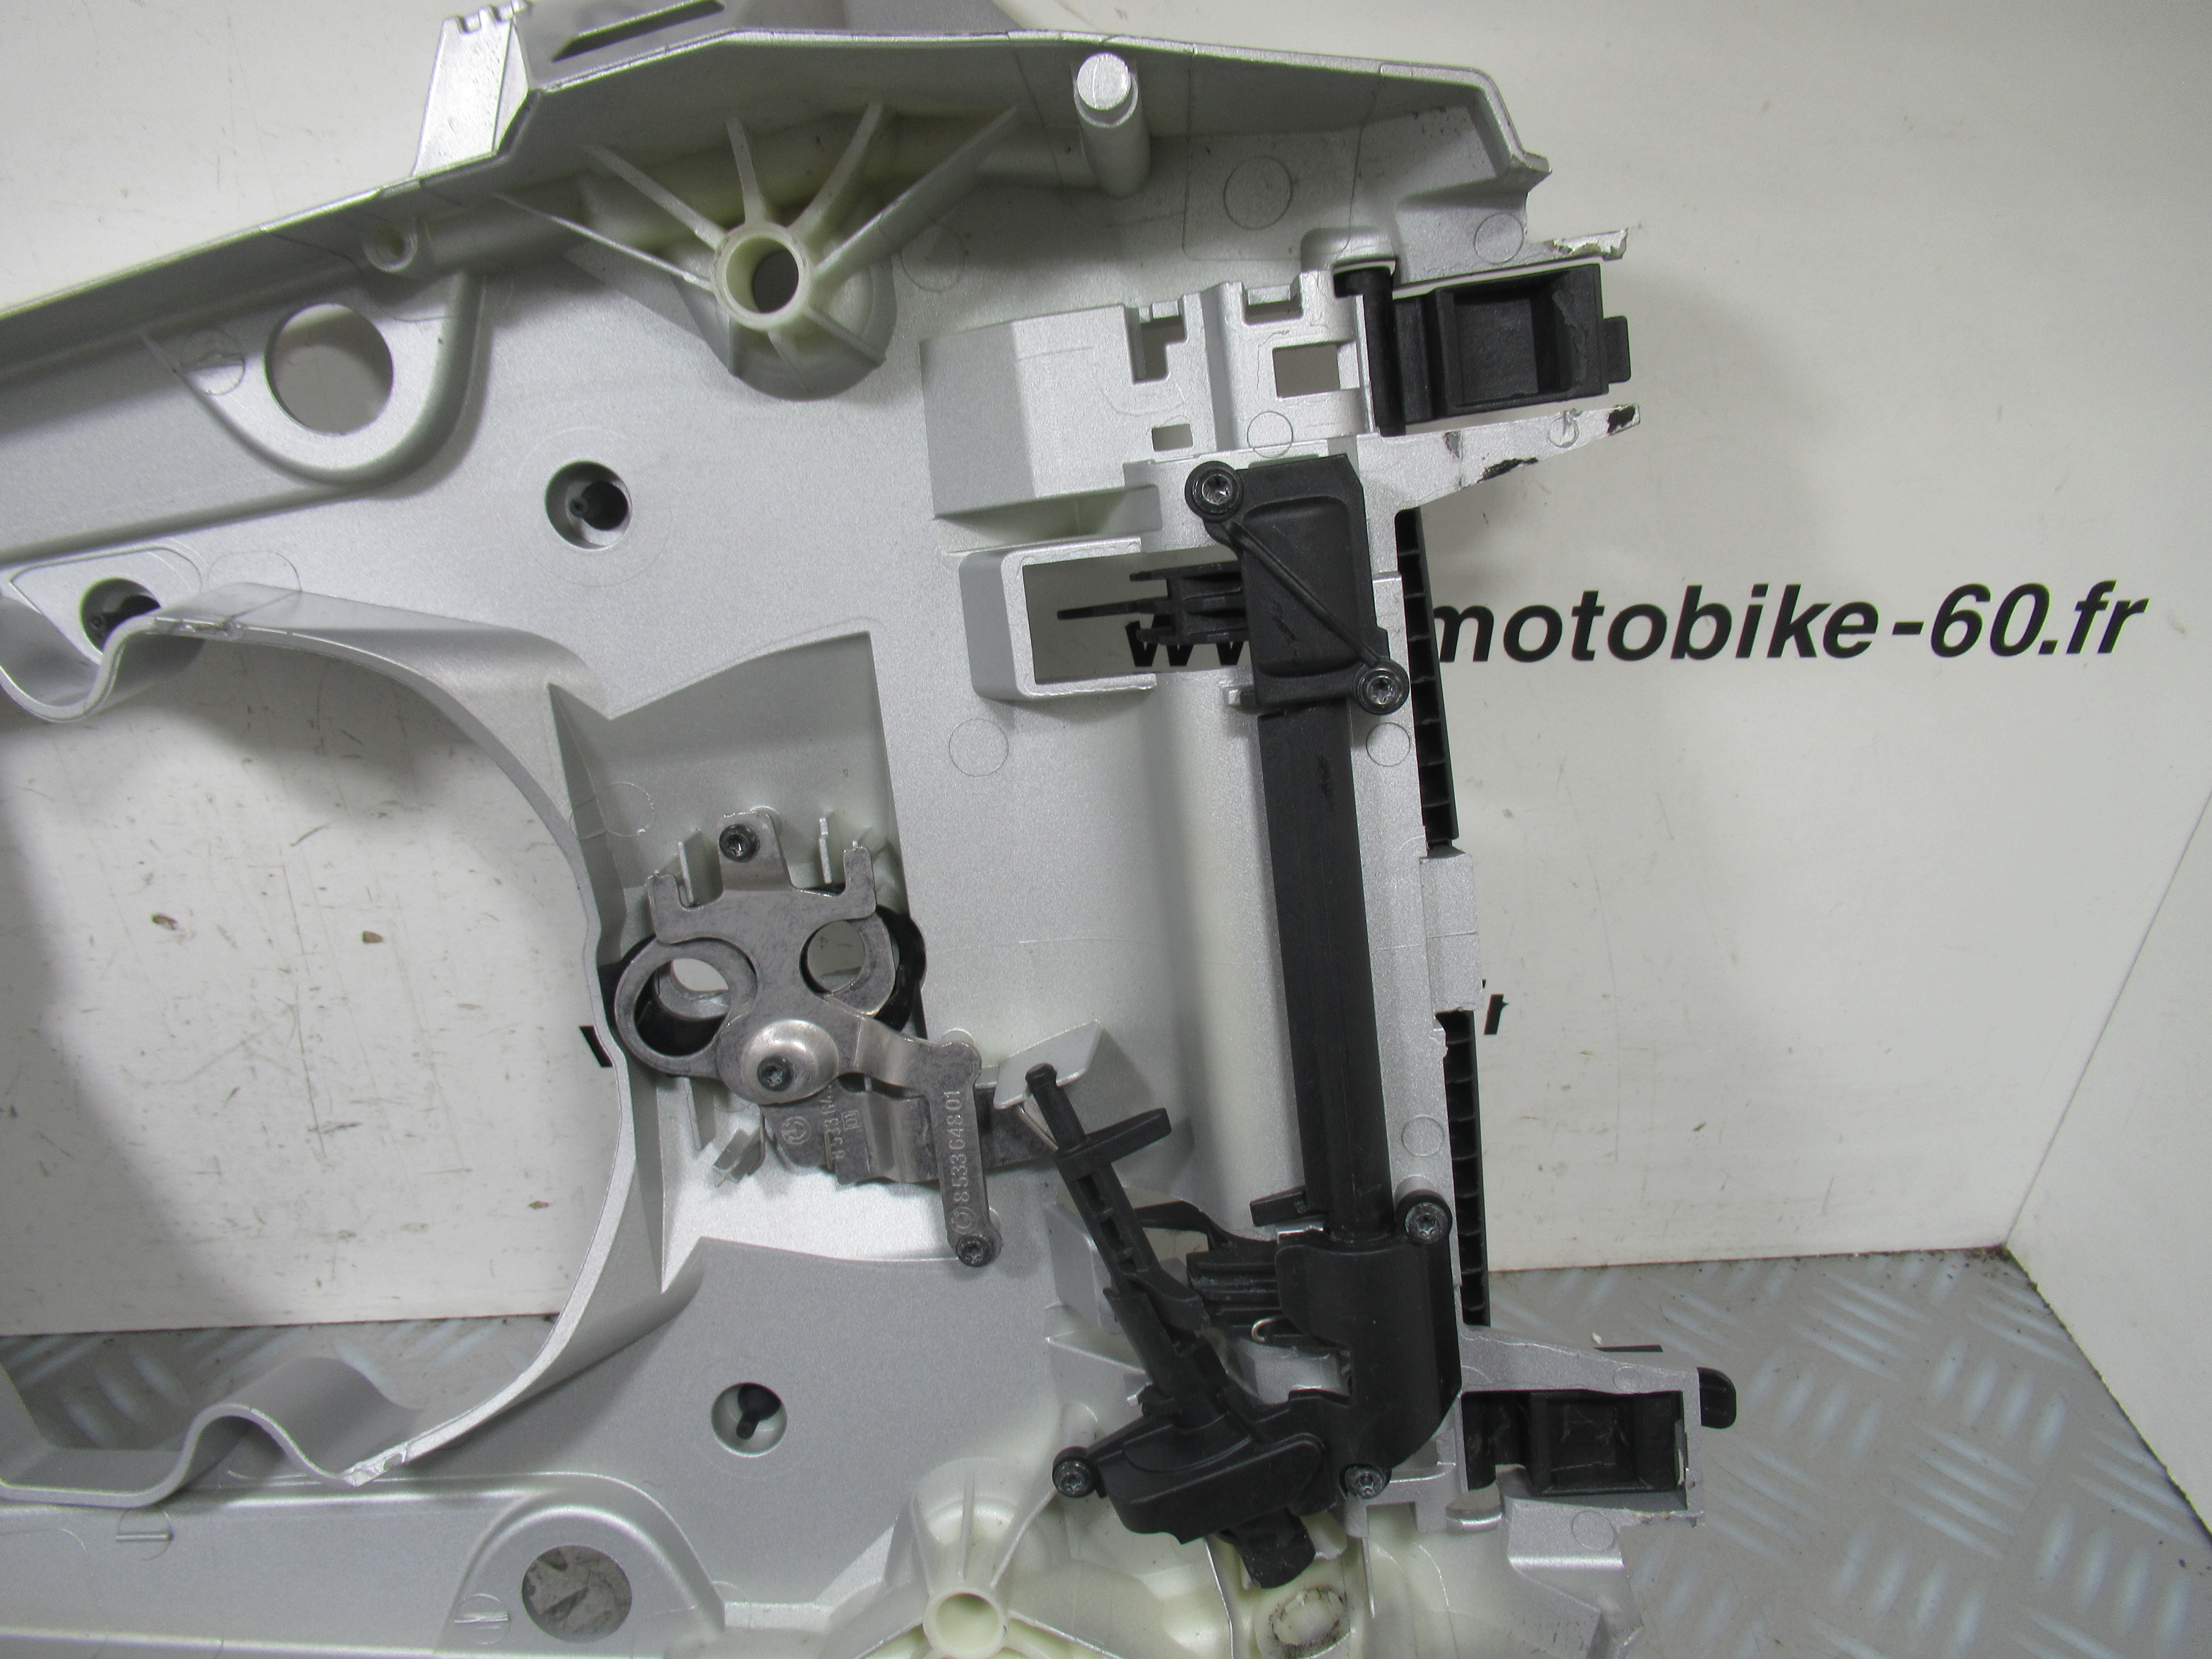 Support valise + top case BMW R 1250 GS Adventure 4t (8532319)